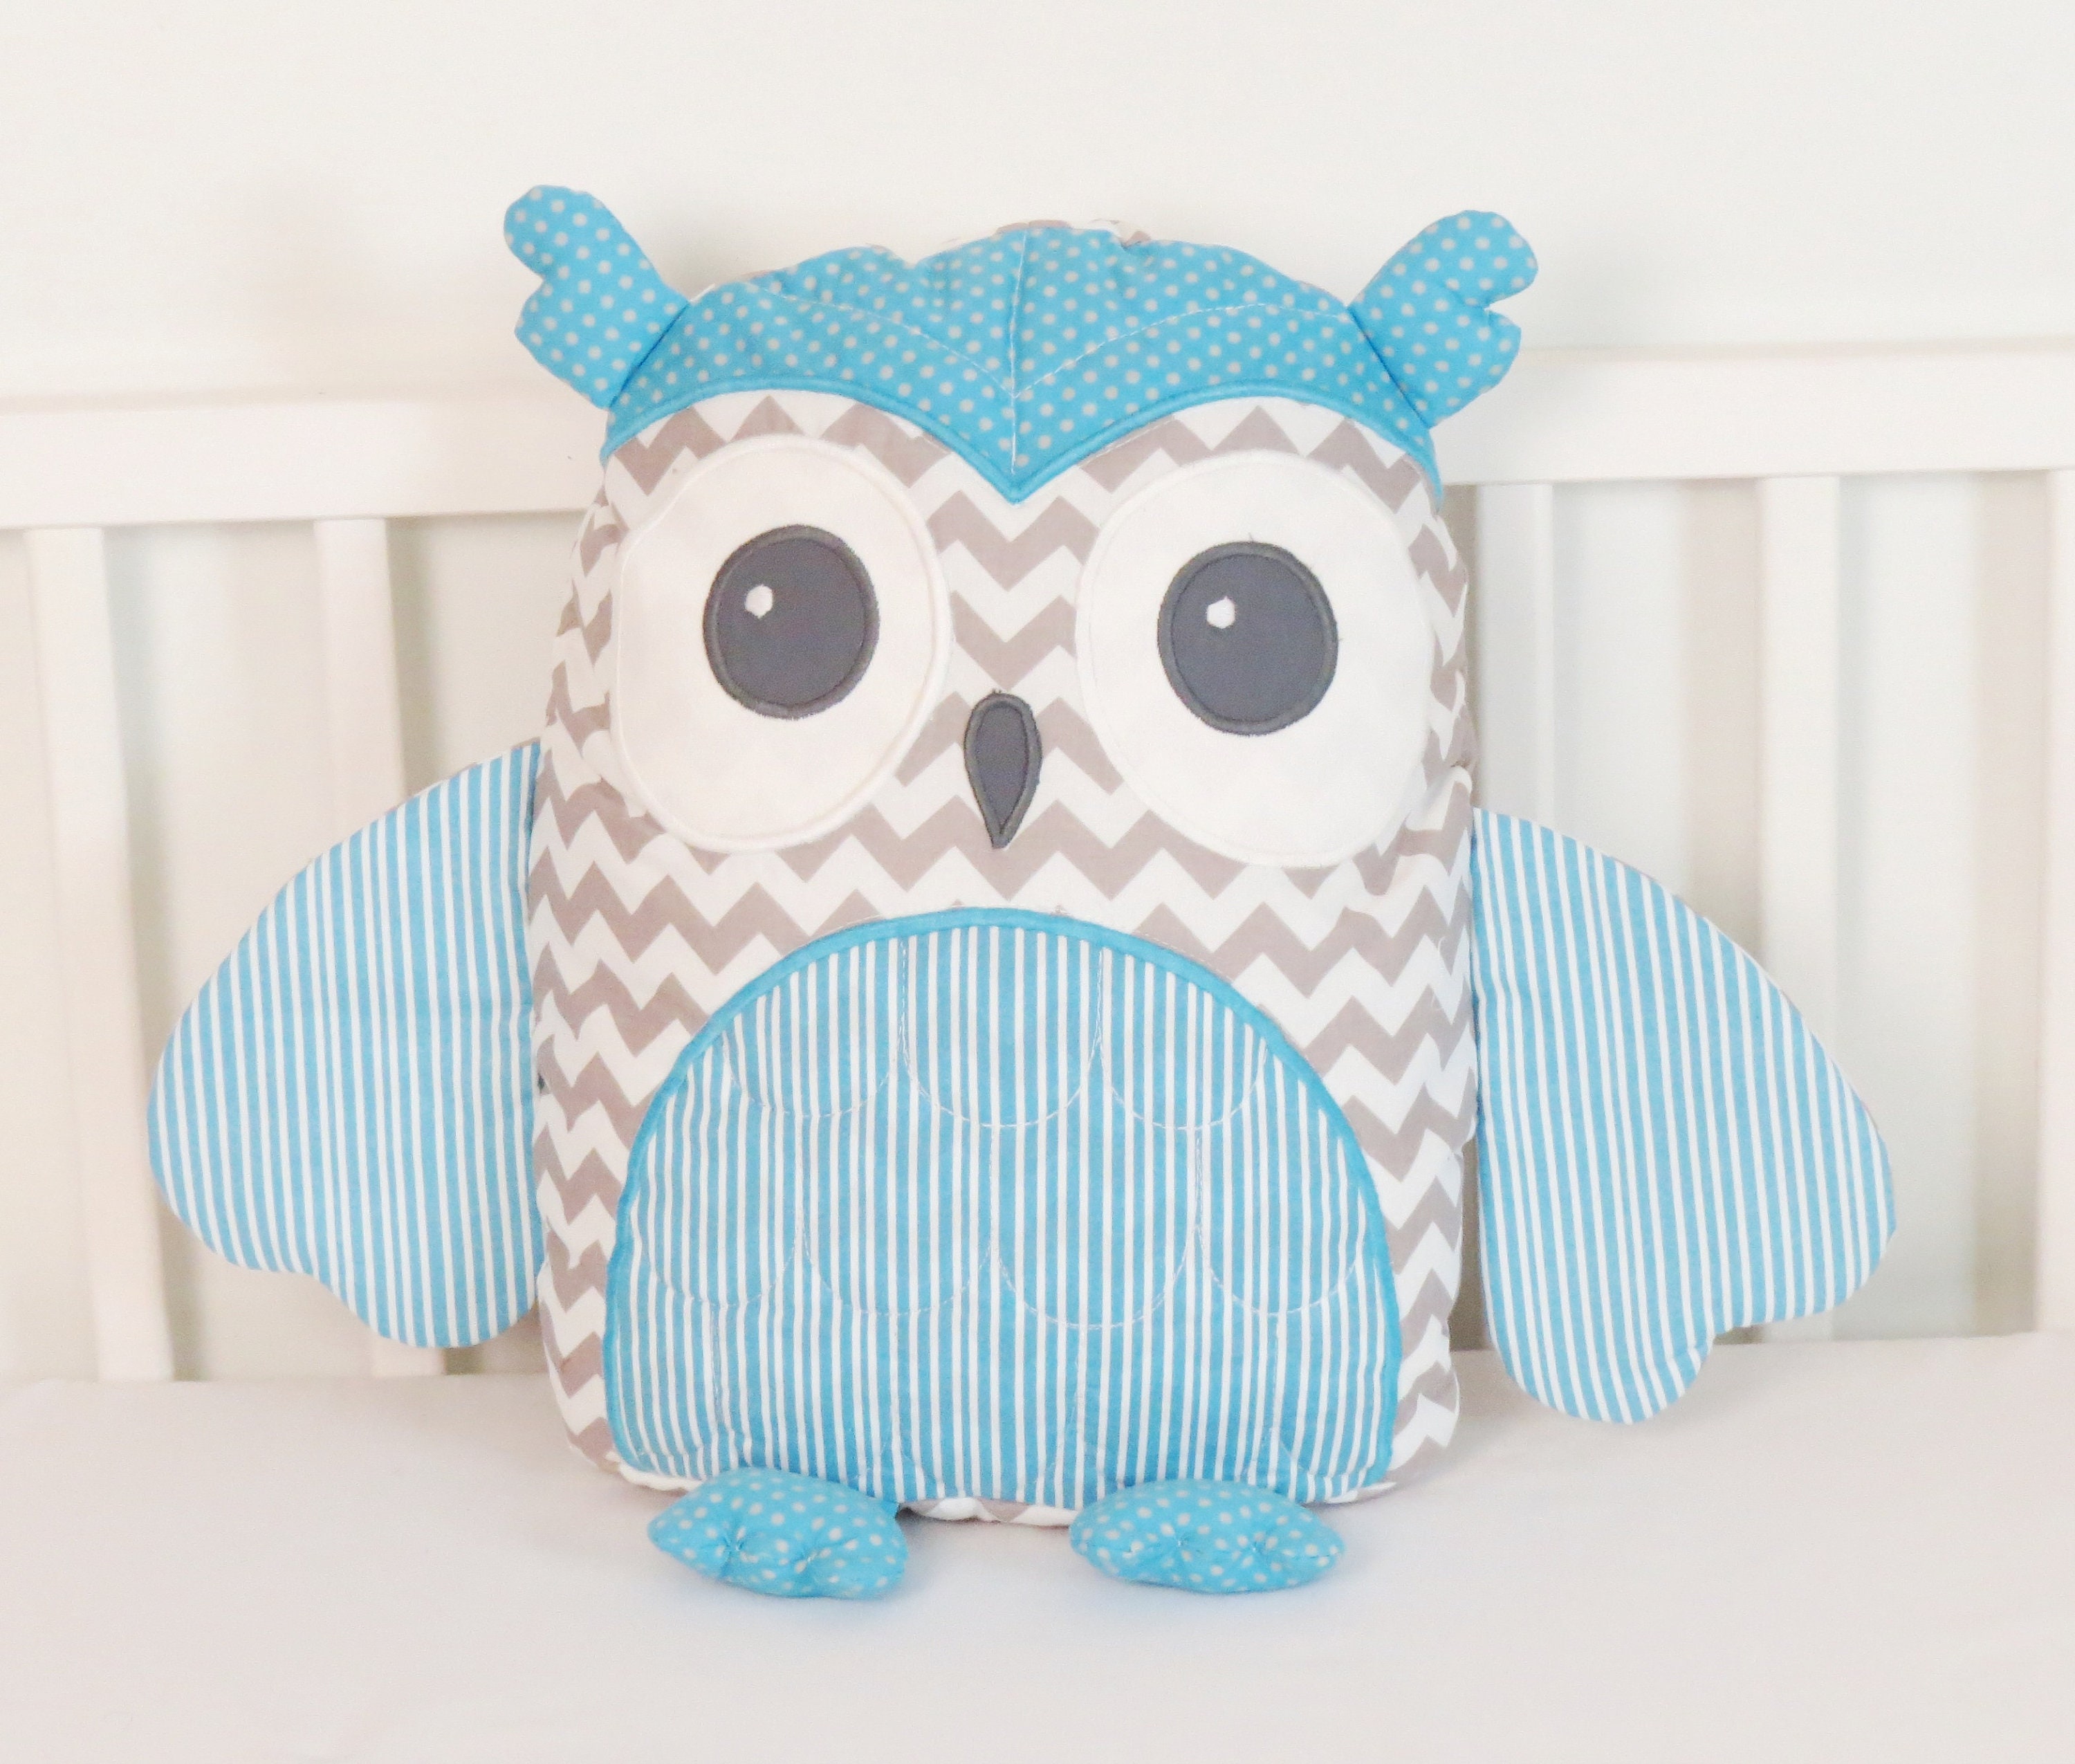 Unique Owl Baby Shower Gift for Baby Boy,  Blue Gray Owl Pillow, Personalized Baby Owl, Stuffed  Cus